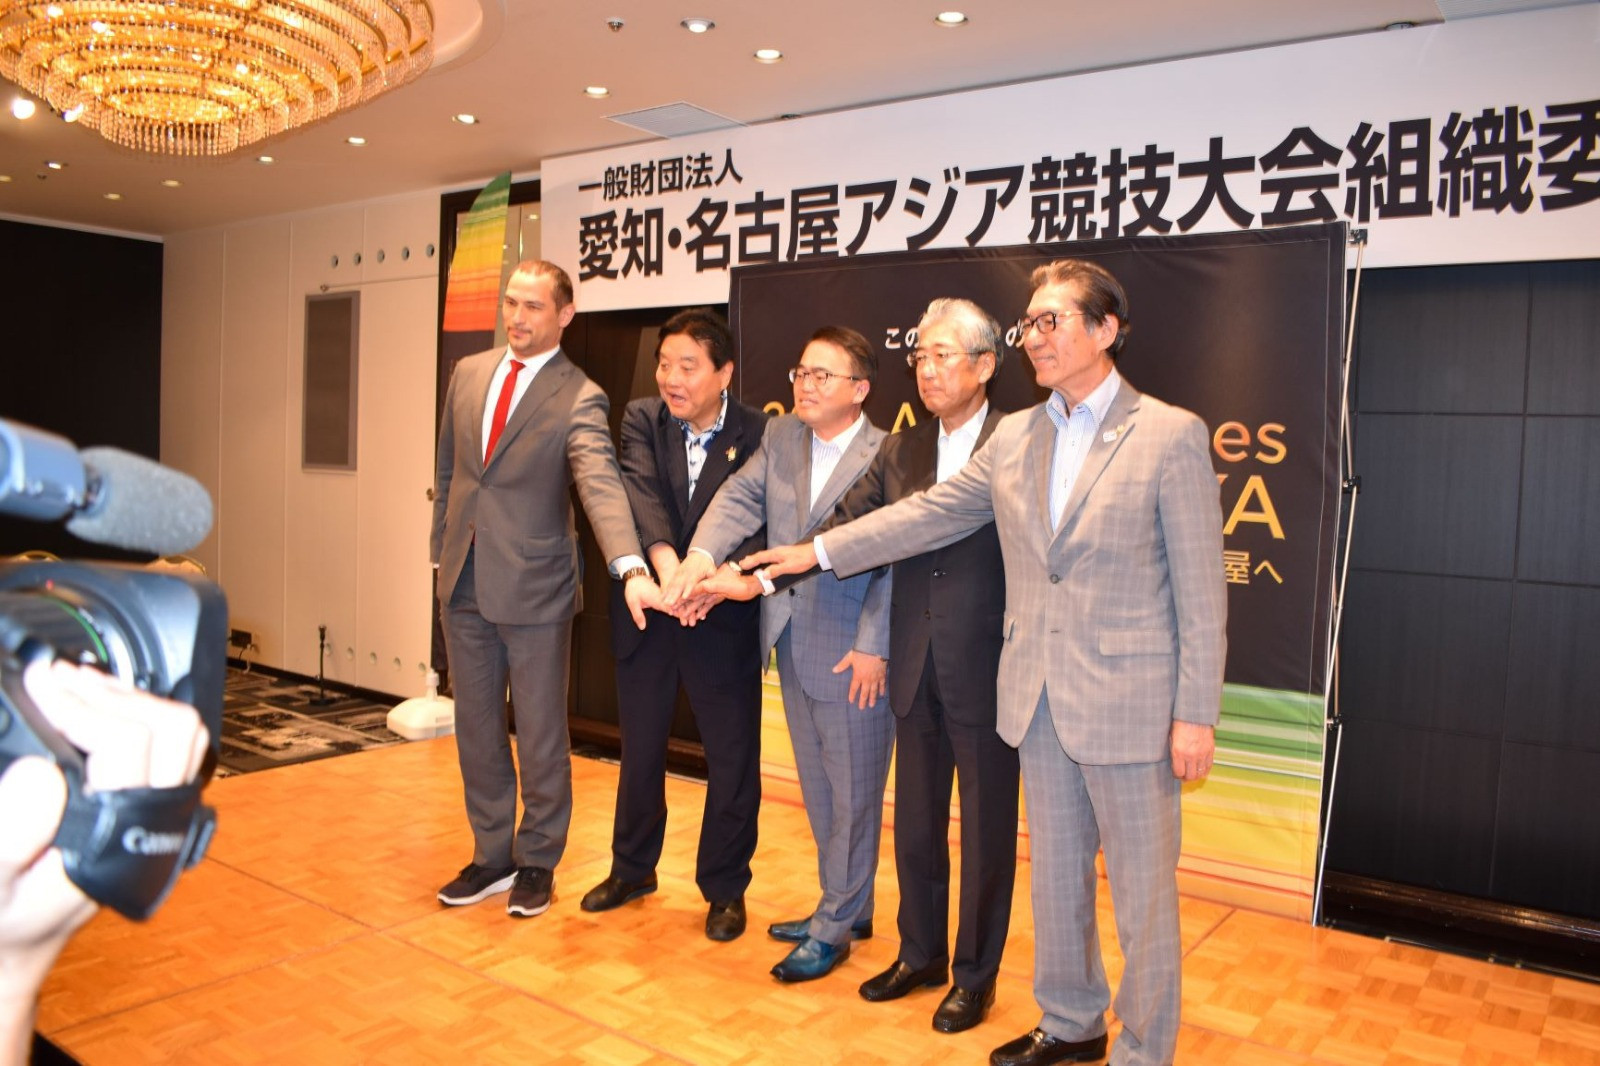 Aichi-Nagoya 2026 Organising Committee set up to prepare for Asian Games